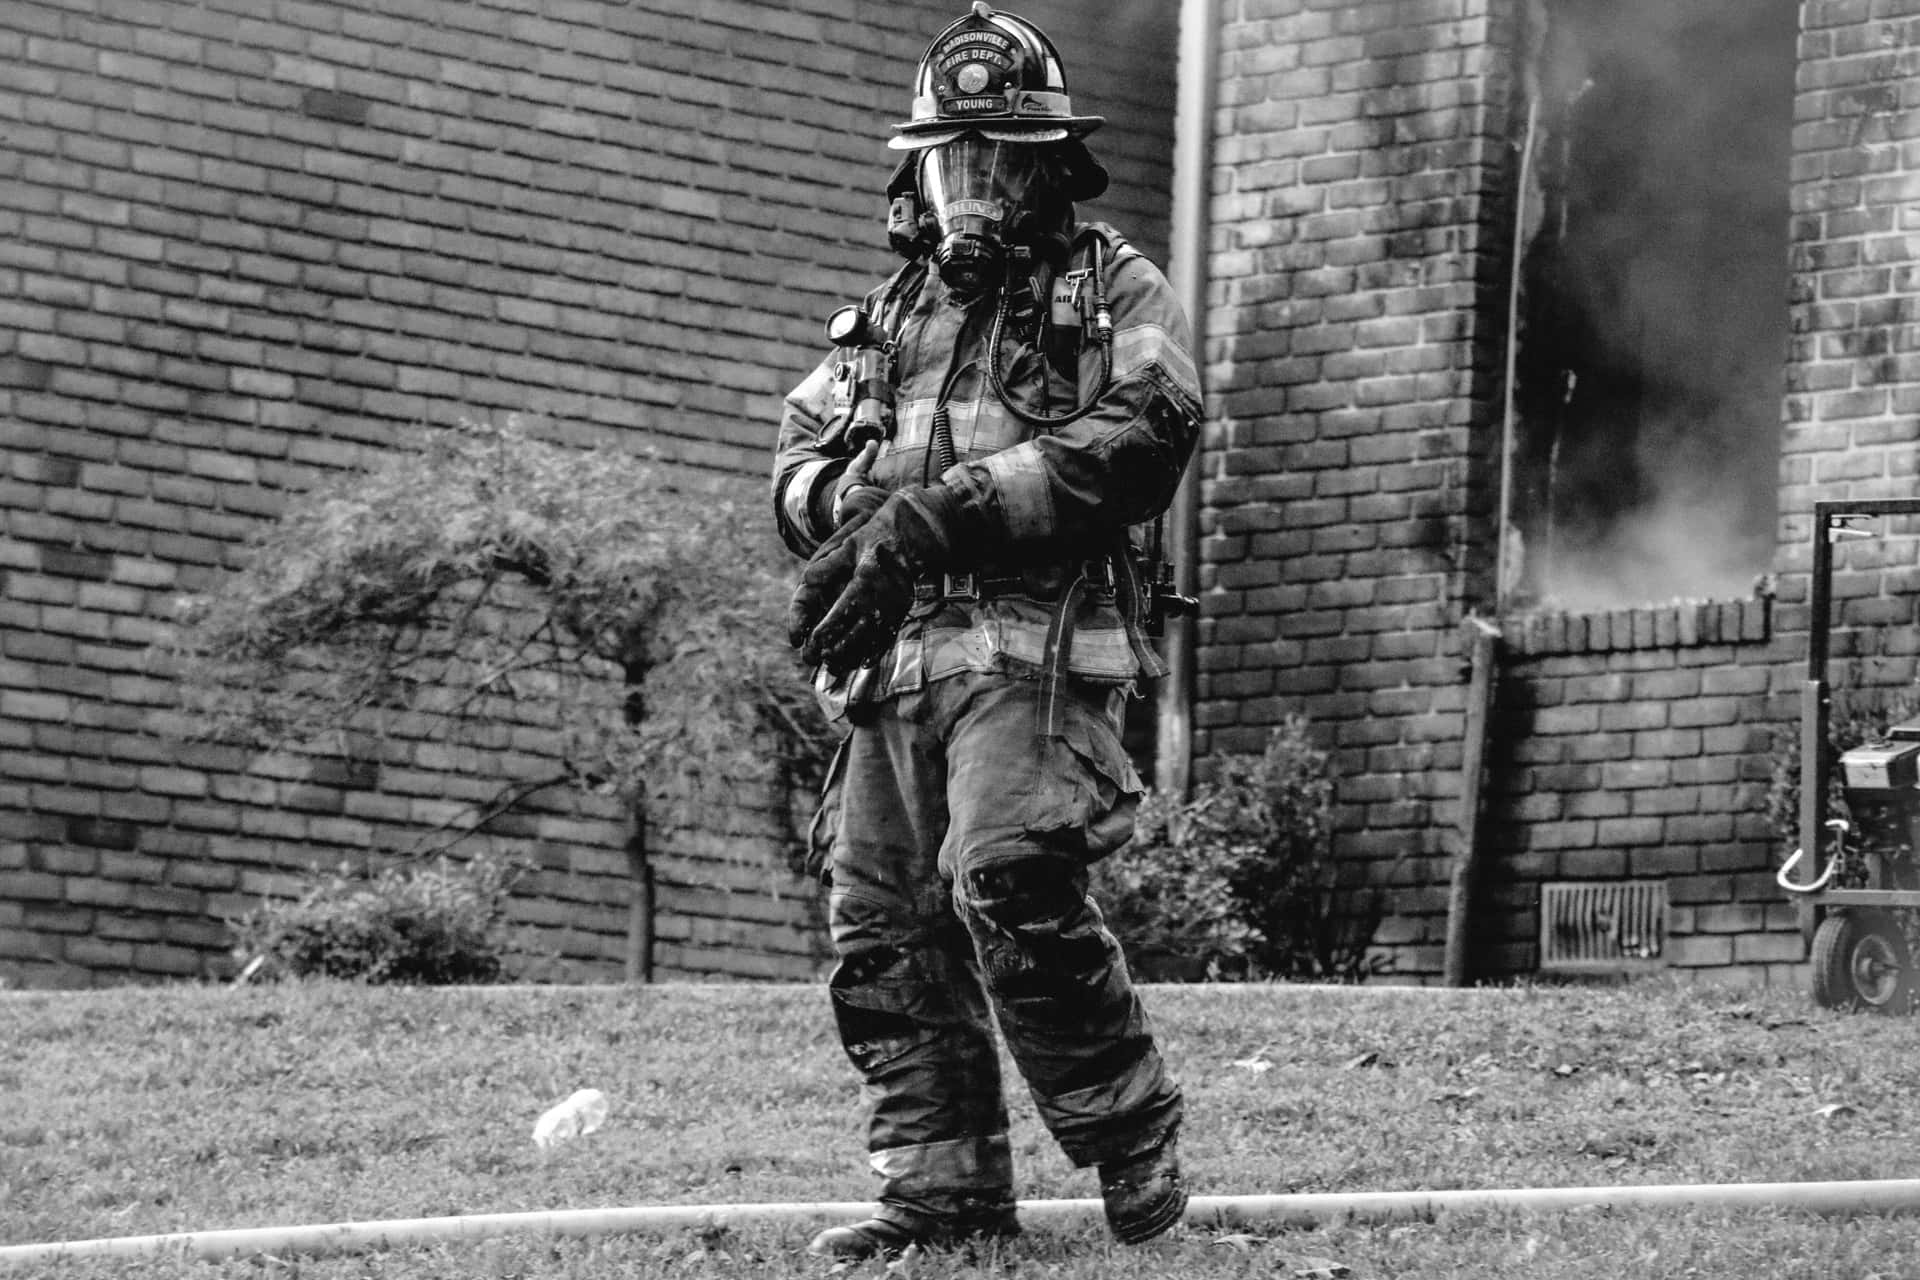 Image  A daring firefighter braving a flaming inferno